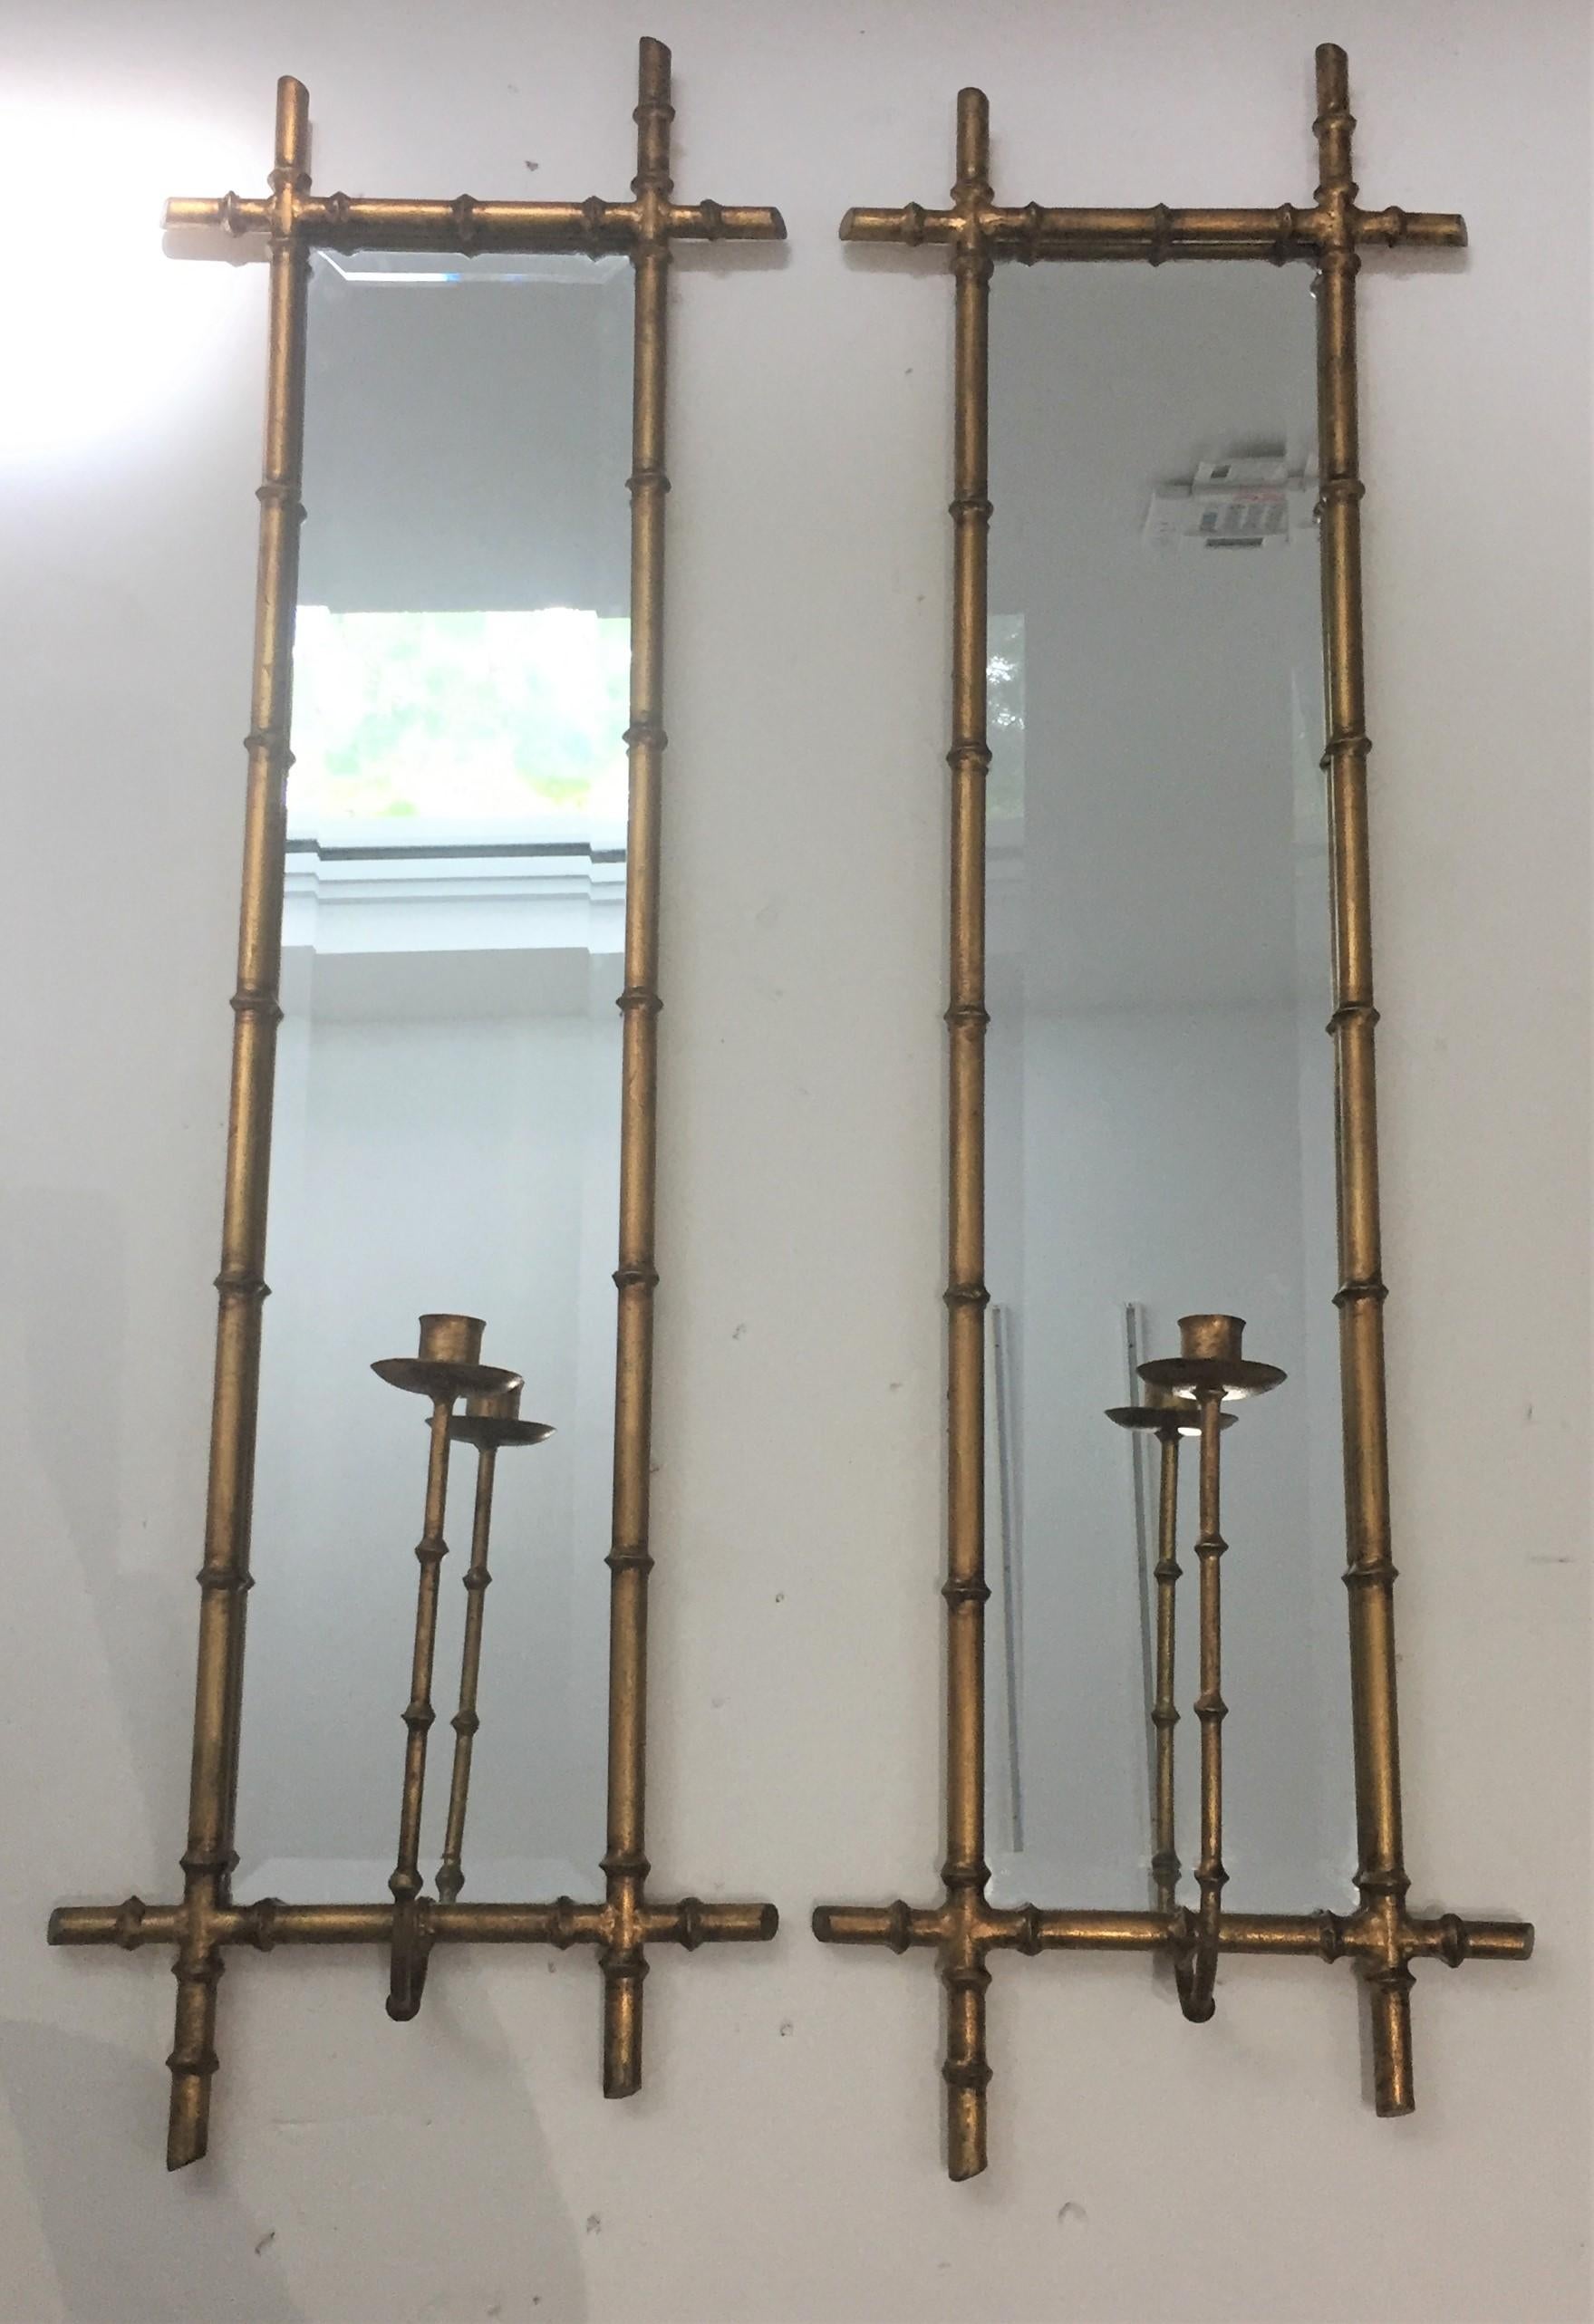 This stylish pair of wall mount candle scones are very much in the Hollywood Regency style so coveted by Tony Duquette and could easily be electrified.

Please note that the 2nd and last pictures show both actual sconces side by side.